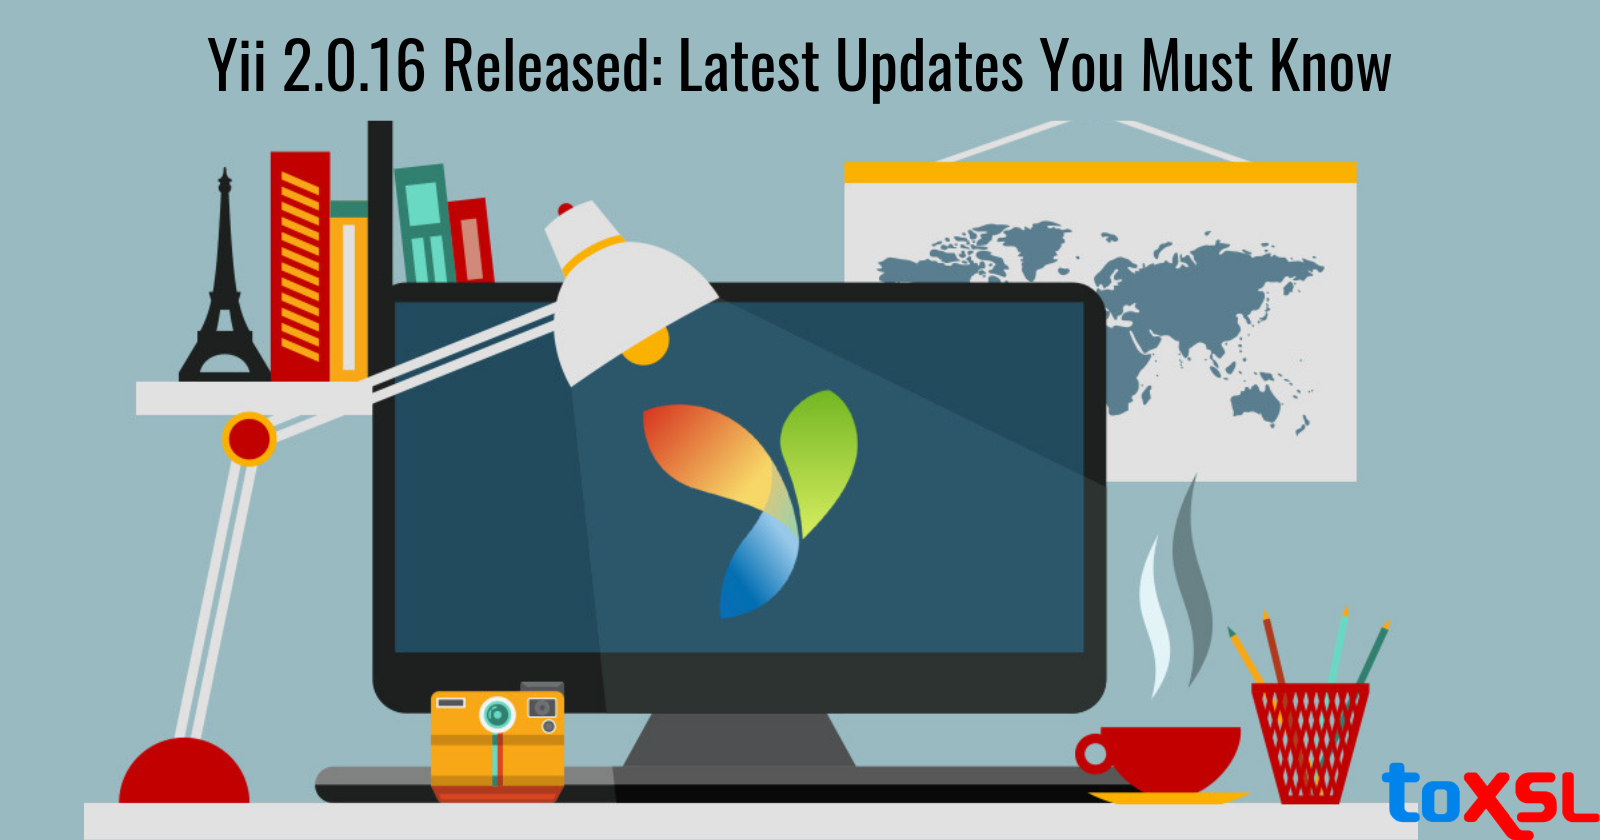 Yii 2.0.16 Released: Latest Updates You Must Know